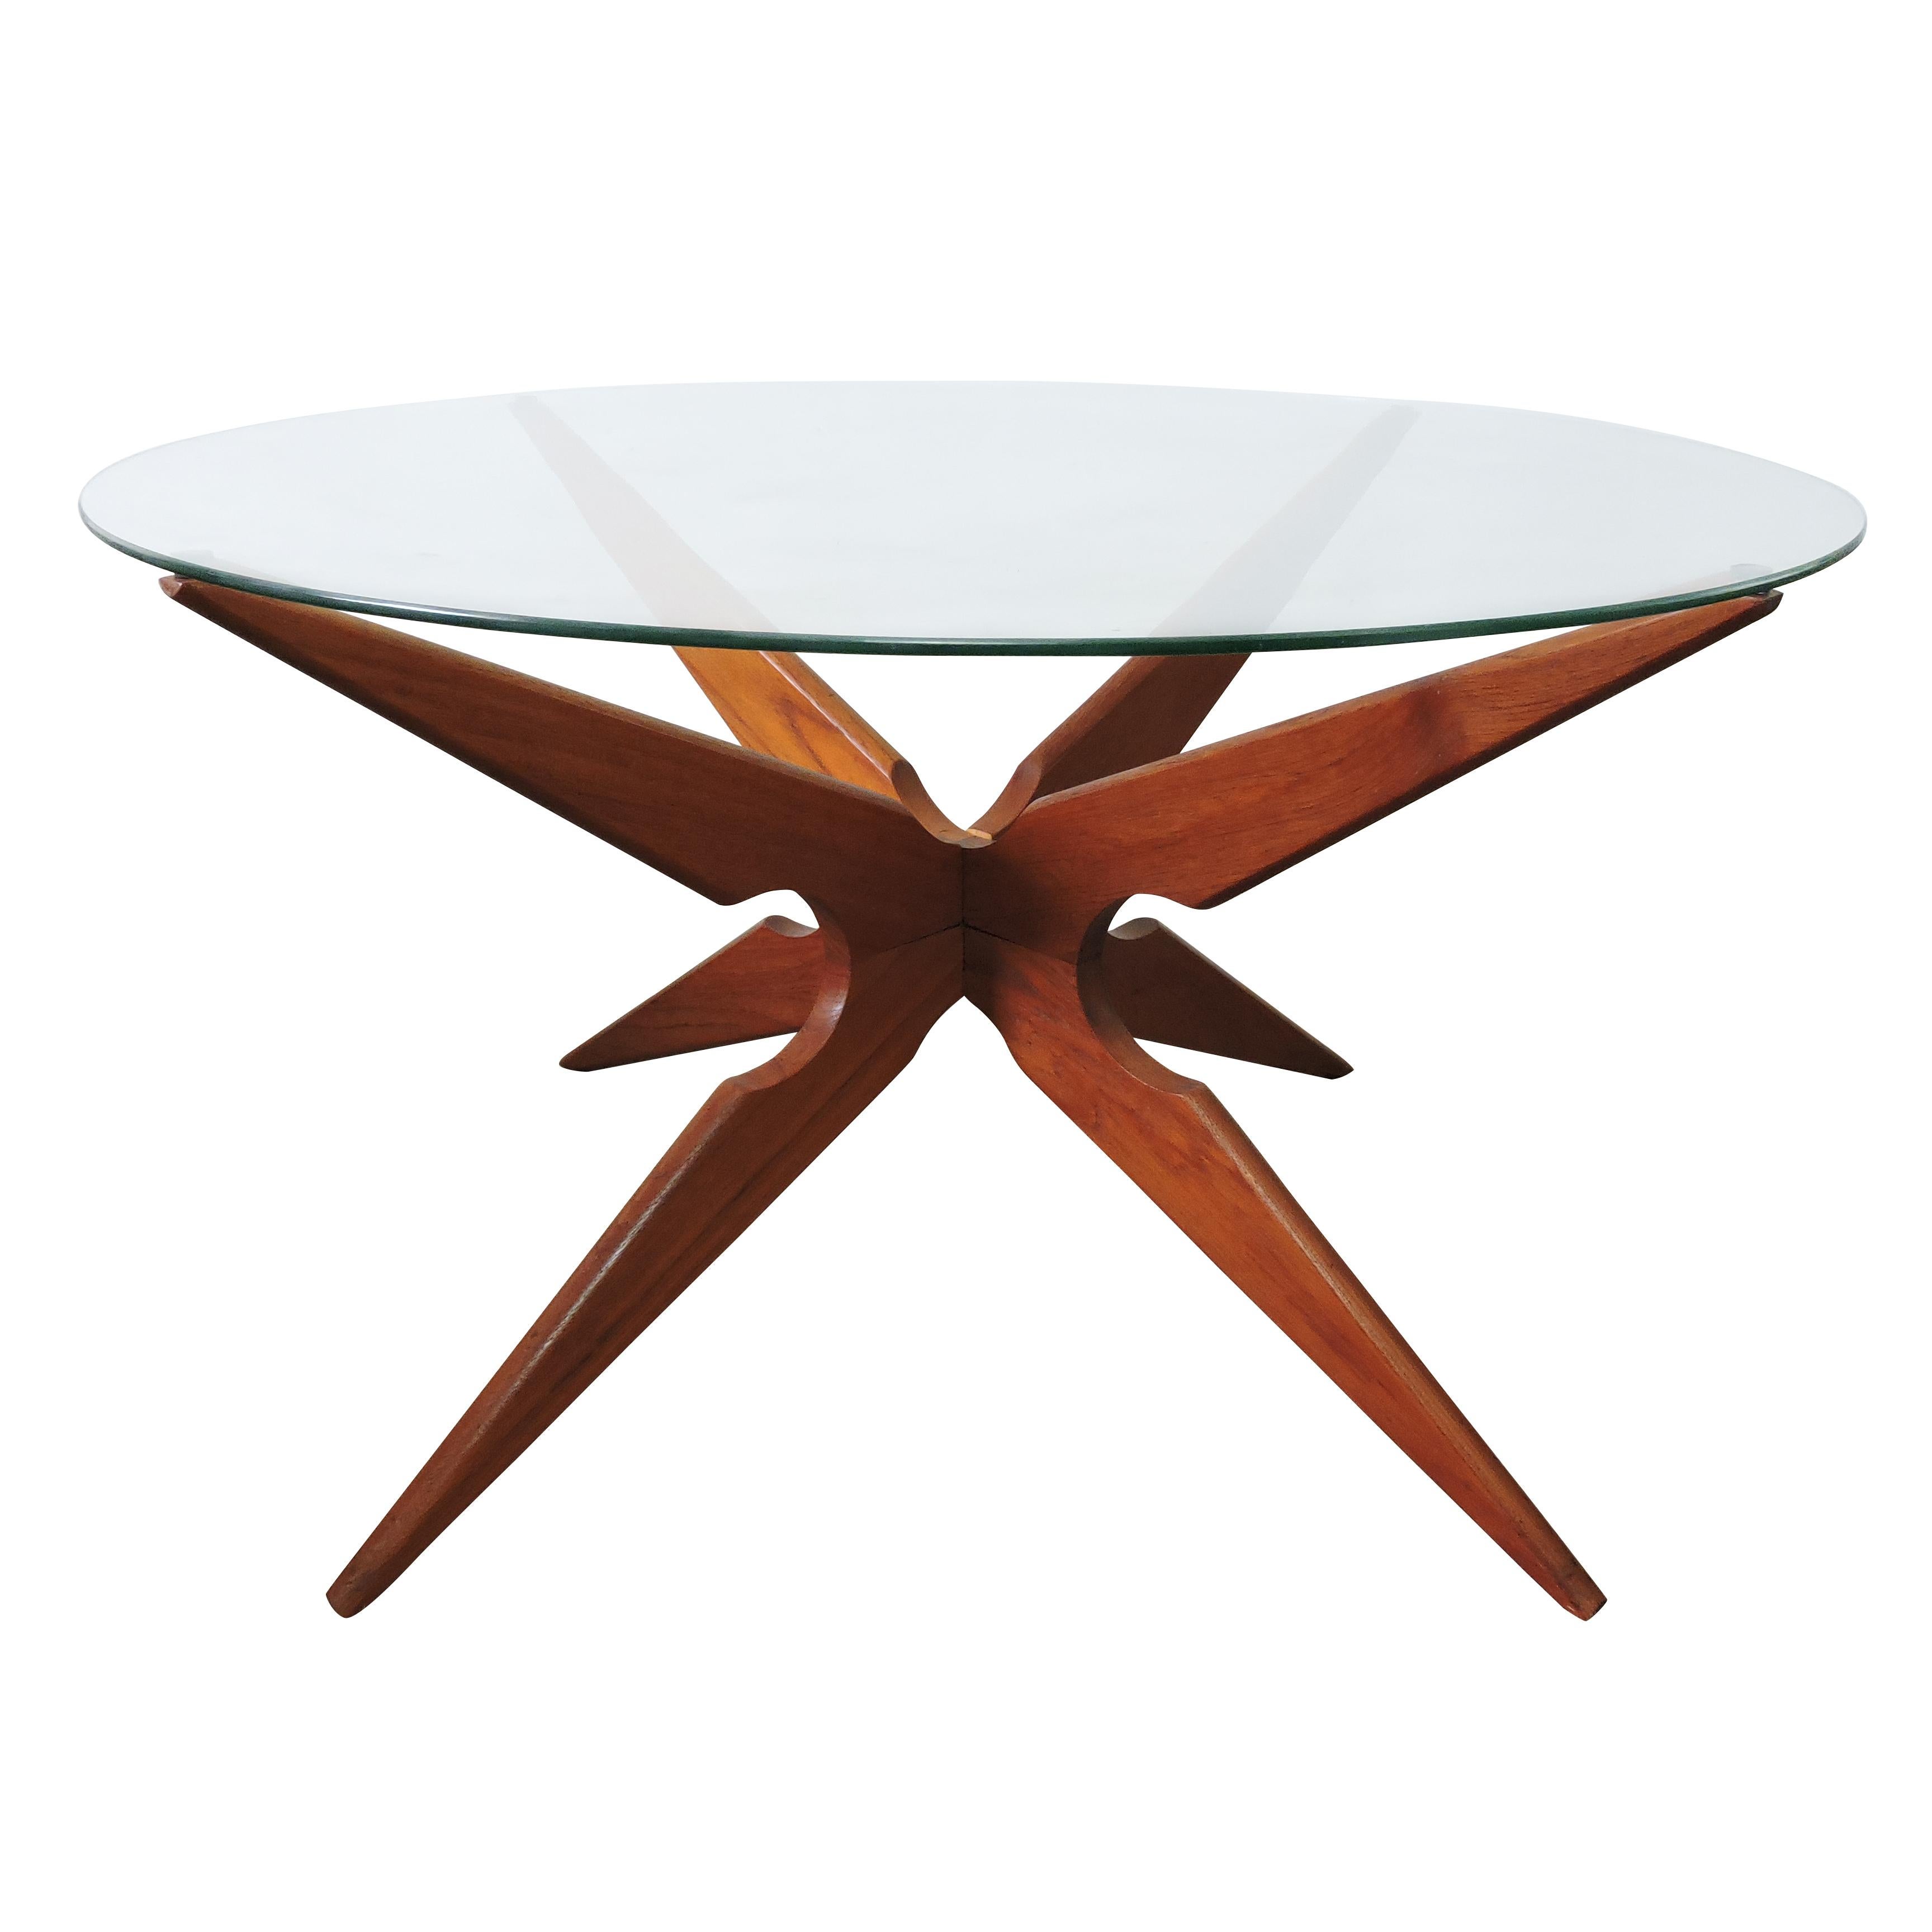 Danish Teak Spider Leg Coffee Table by Sika Mobler, 1960s For Sale